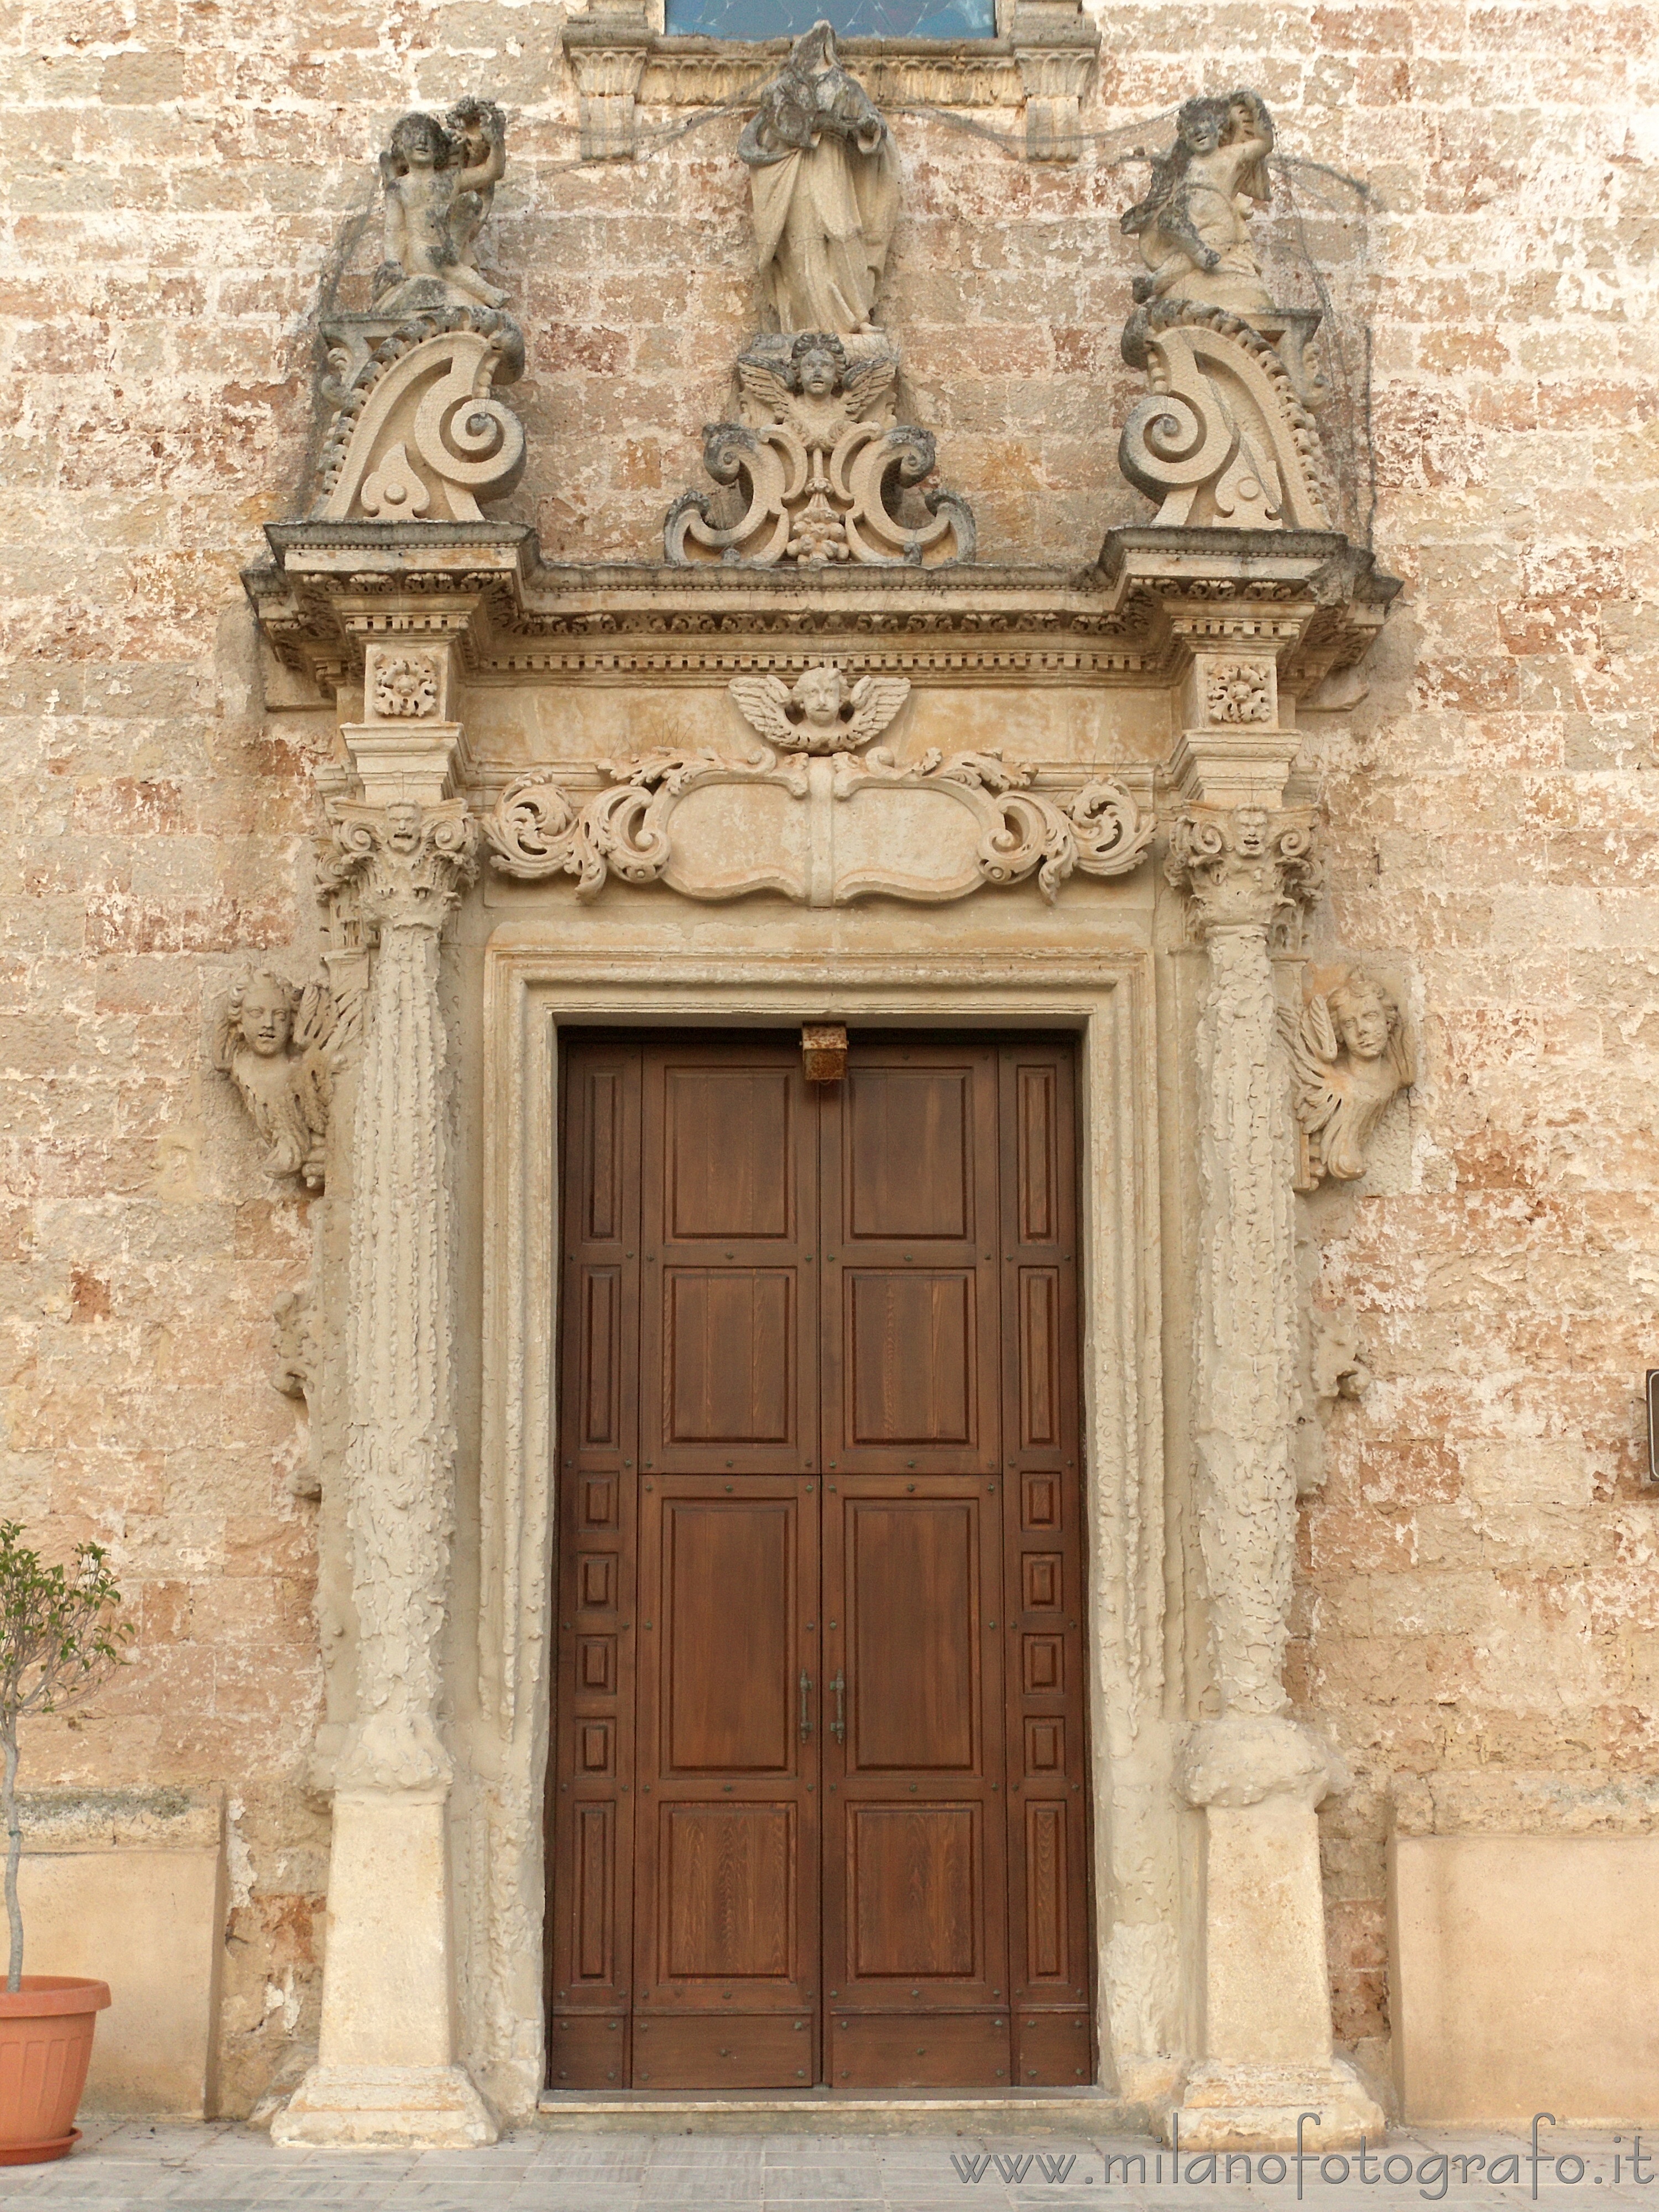 Felline fraction of Alliste (Lecce, Italy): Door of the Church of Our Lady of Sorrows - Felline fraction of Alliste (Lecce, Italy)